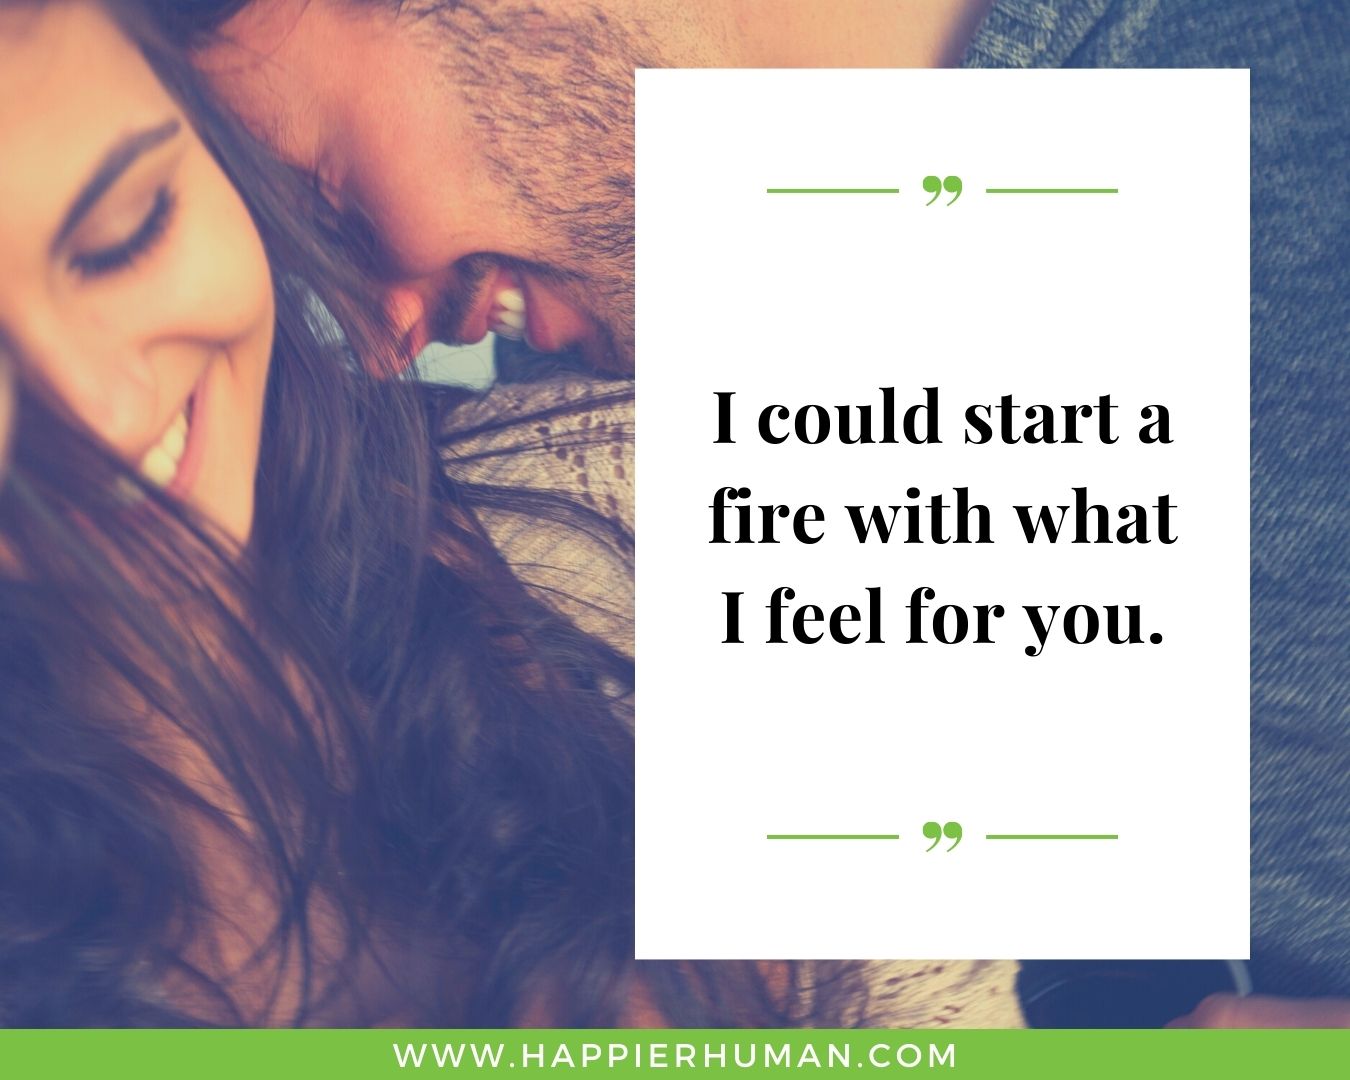 Simple uplifting love quotes - “I could start a fire with what I feel for you.”